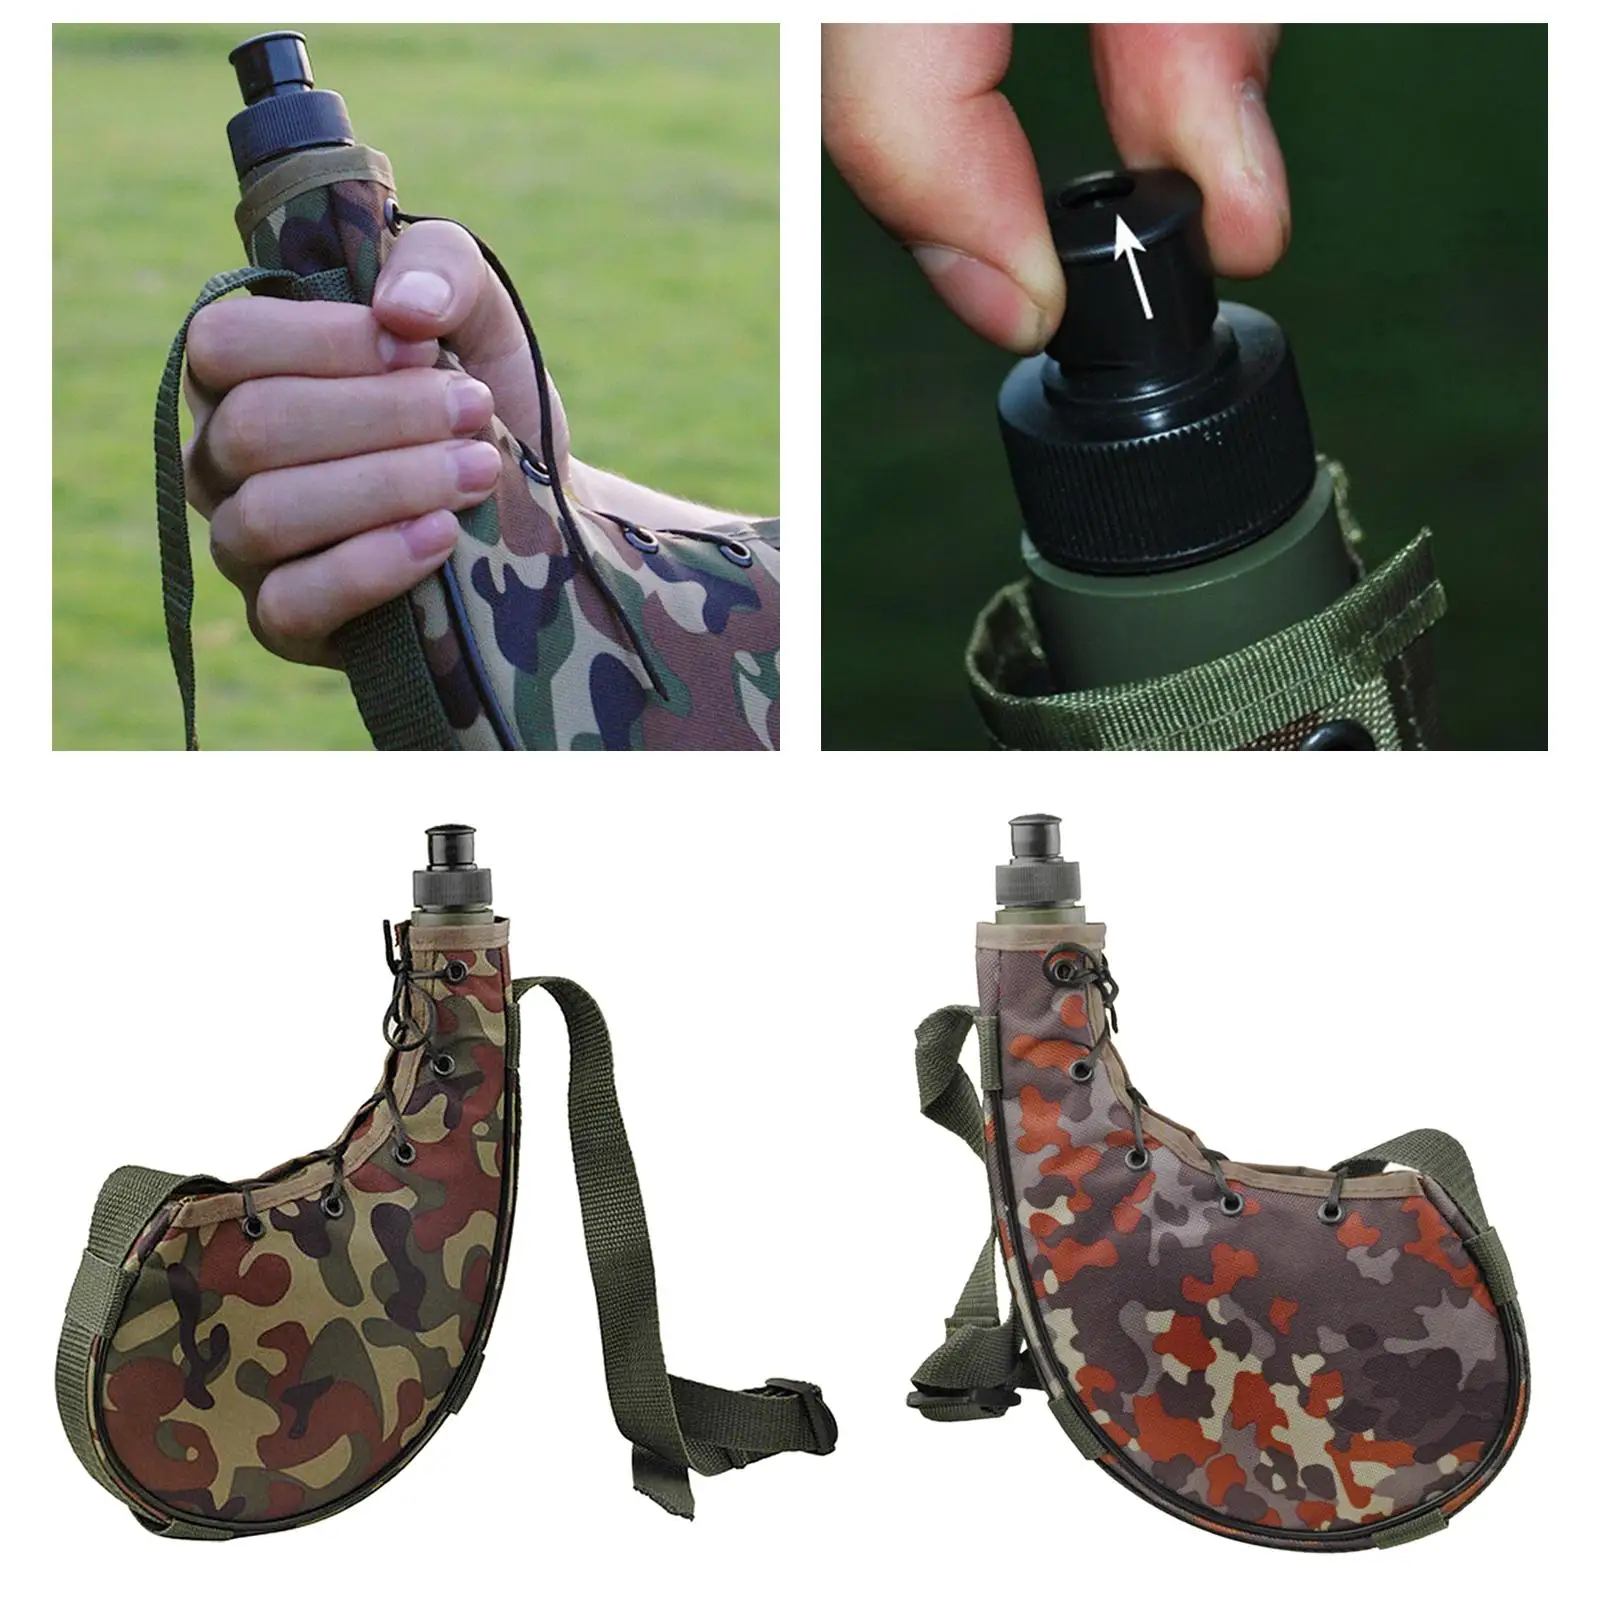 Leakproof Camping Hip Flask Outdoor Water Bottle for Hiking Climbing Fishing